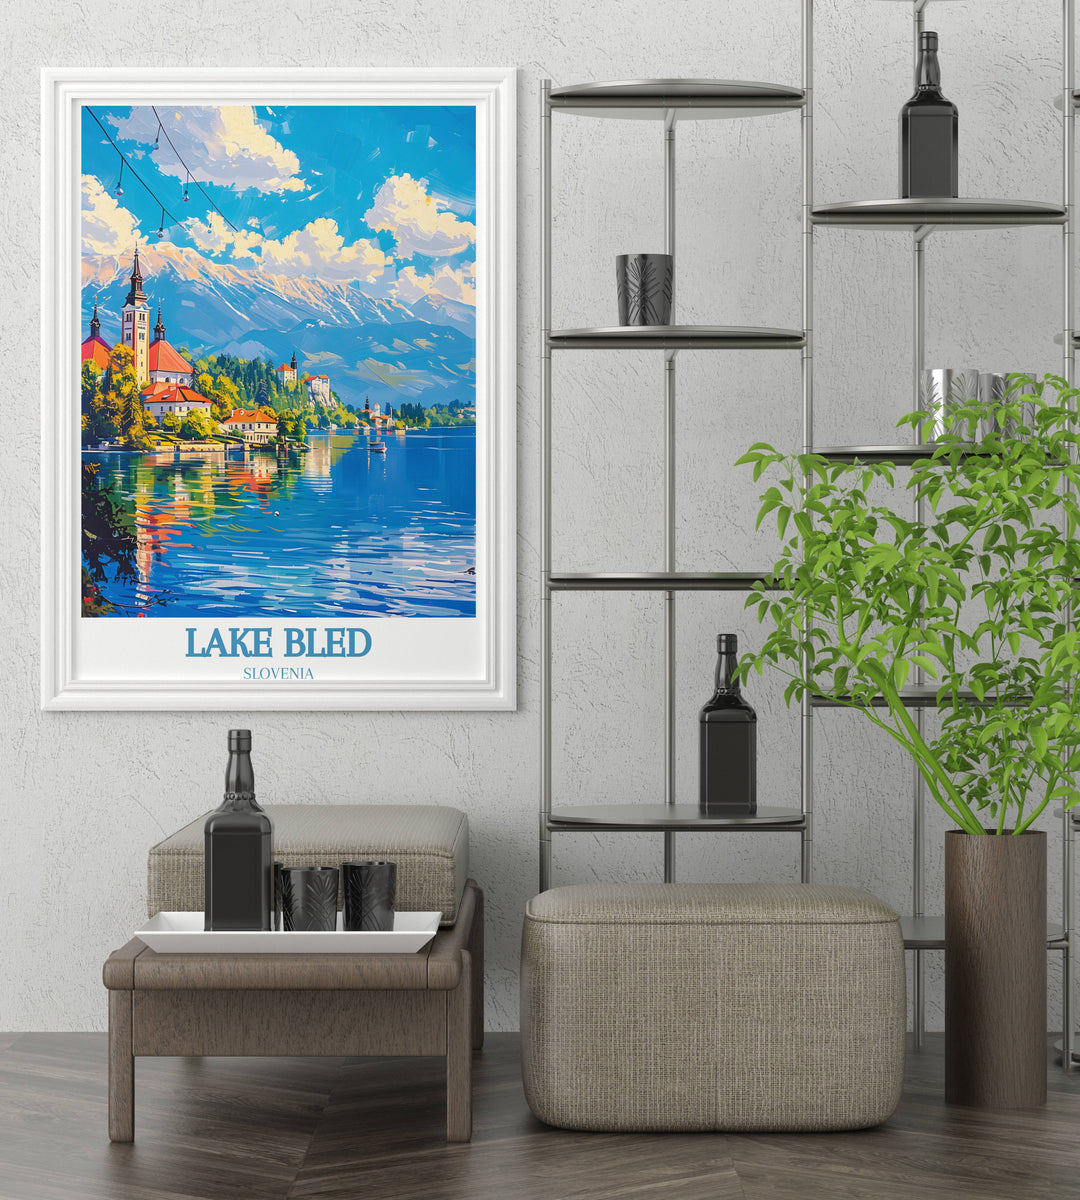 Elegant Lake Bled Home Decor print showing a serene sunrise over the lake, ideal for creating a calming atmosphere in any room, and perfect for those who appreciate the beauty of dawn as it highlights natural landscapes